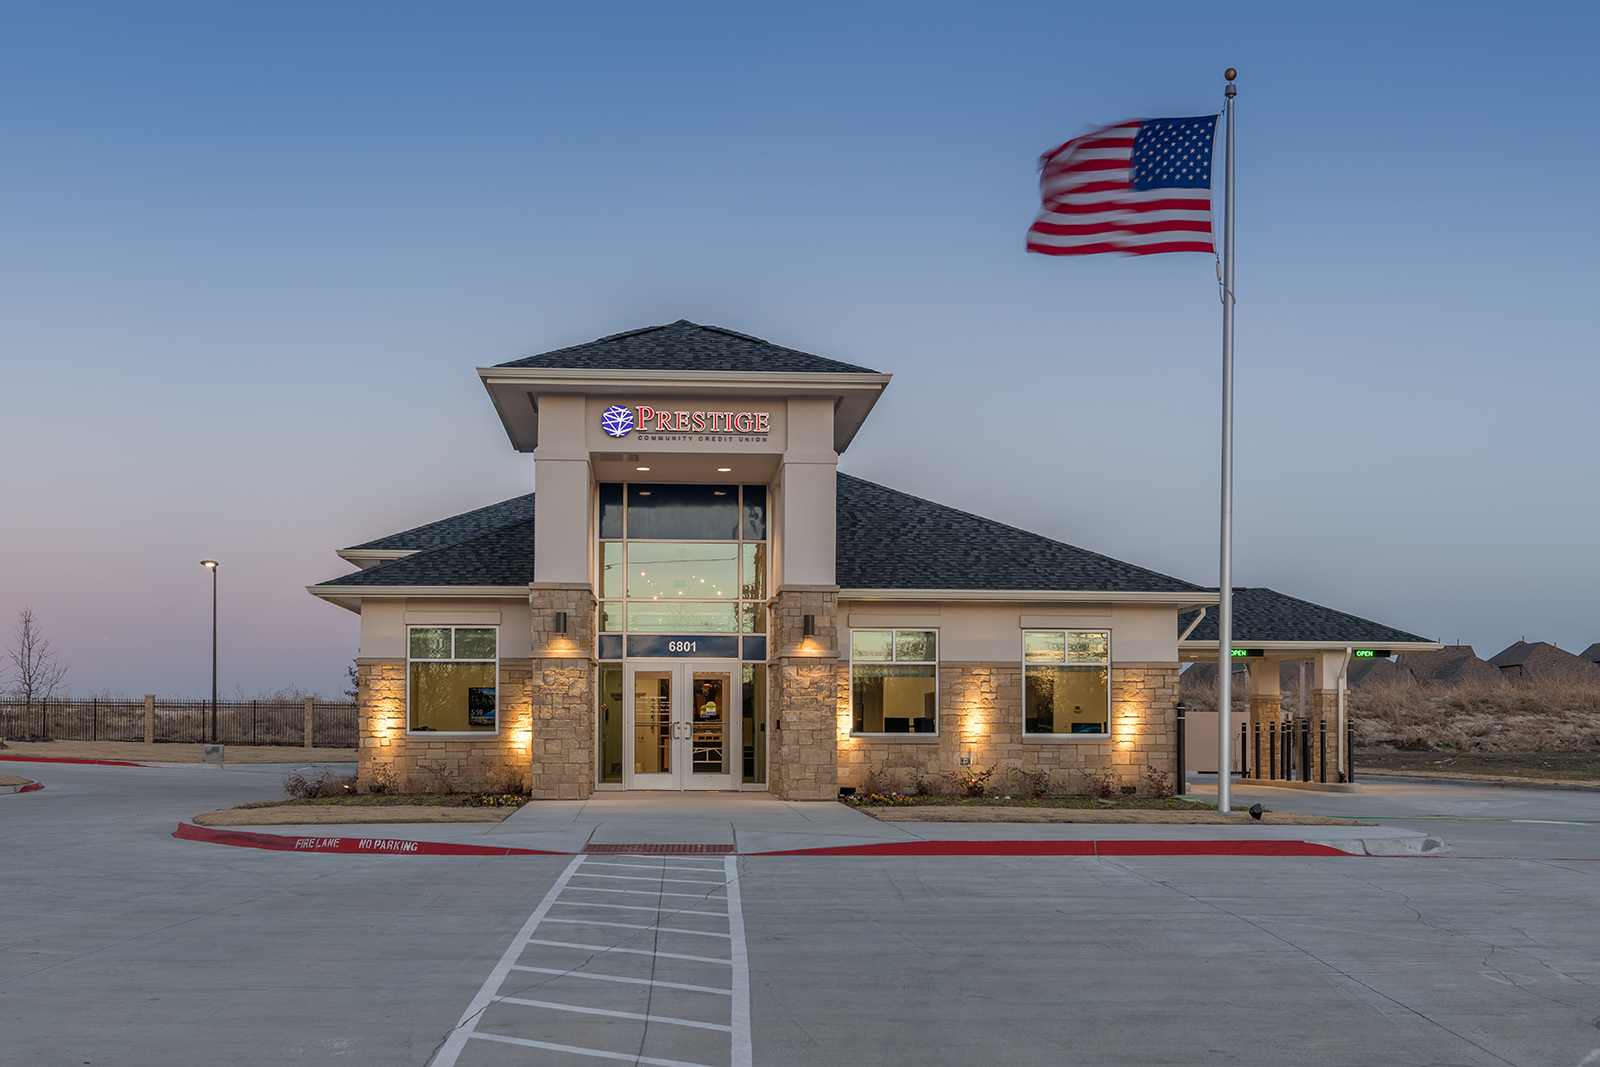 New credit union branch in Texas